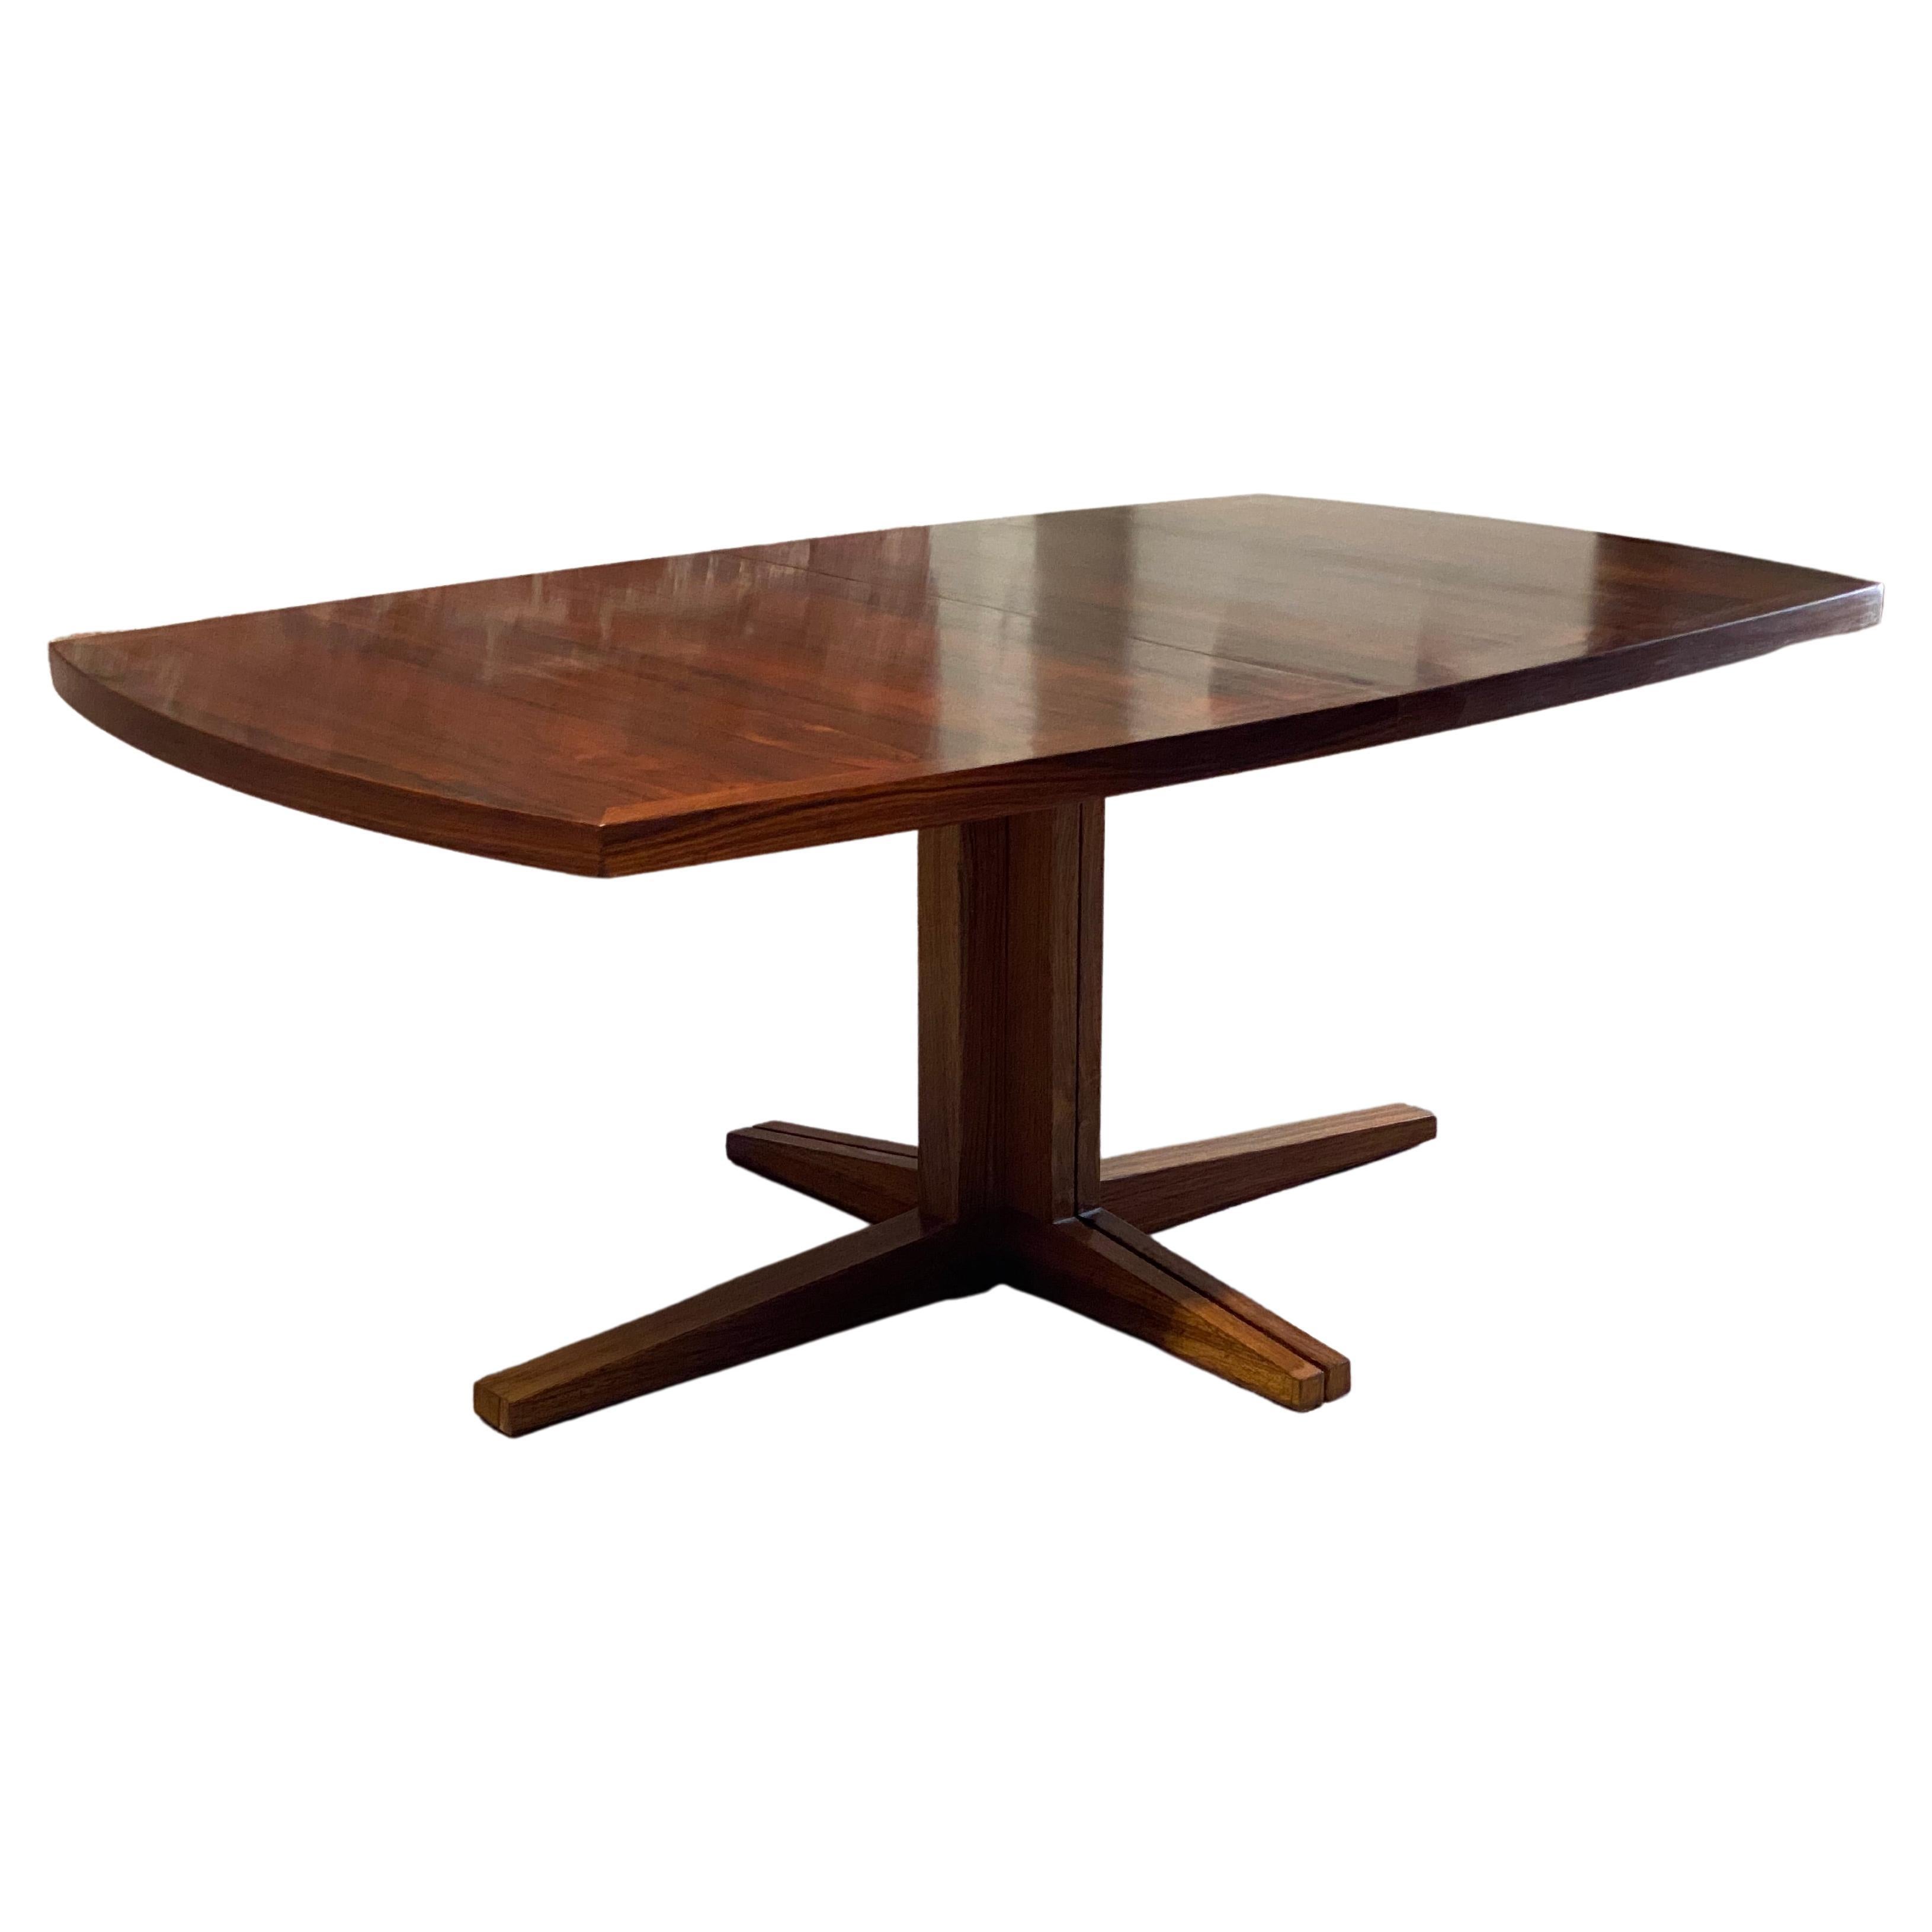 John Mortensen for Heltborg Møbler Danish Modern Rosewood dining table with two leaves. Beautifully figured Rosewood veneers. Extends easily to accommodate one leaf or two large leaves. Rectangular top with curved sides. Split pedestal base. Circa